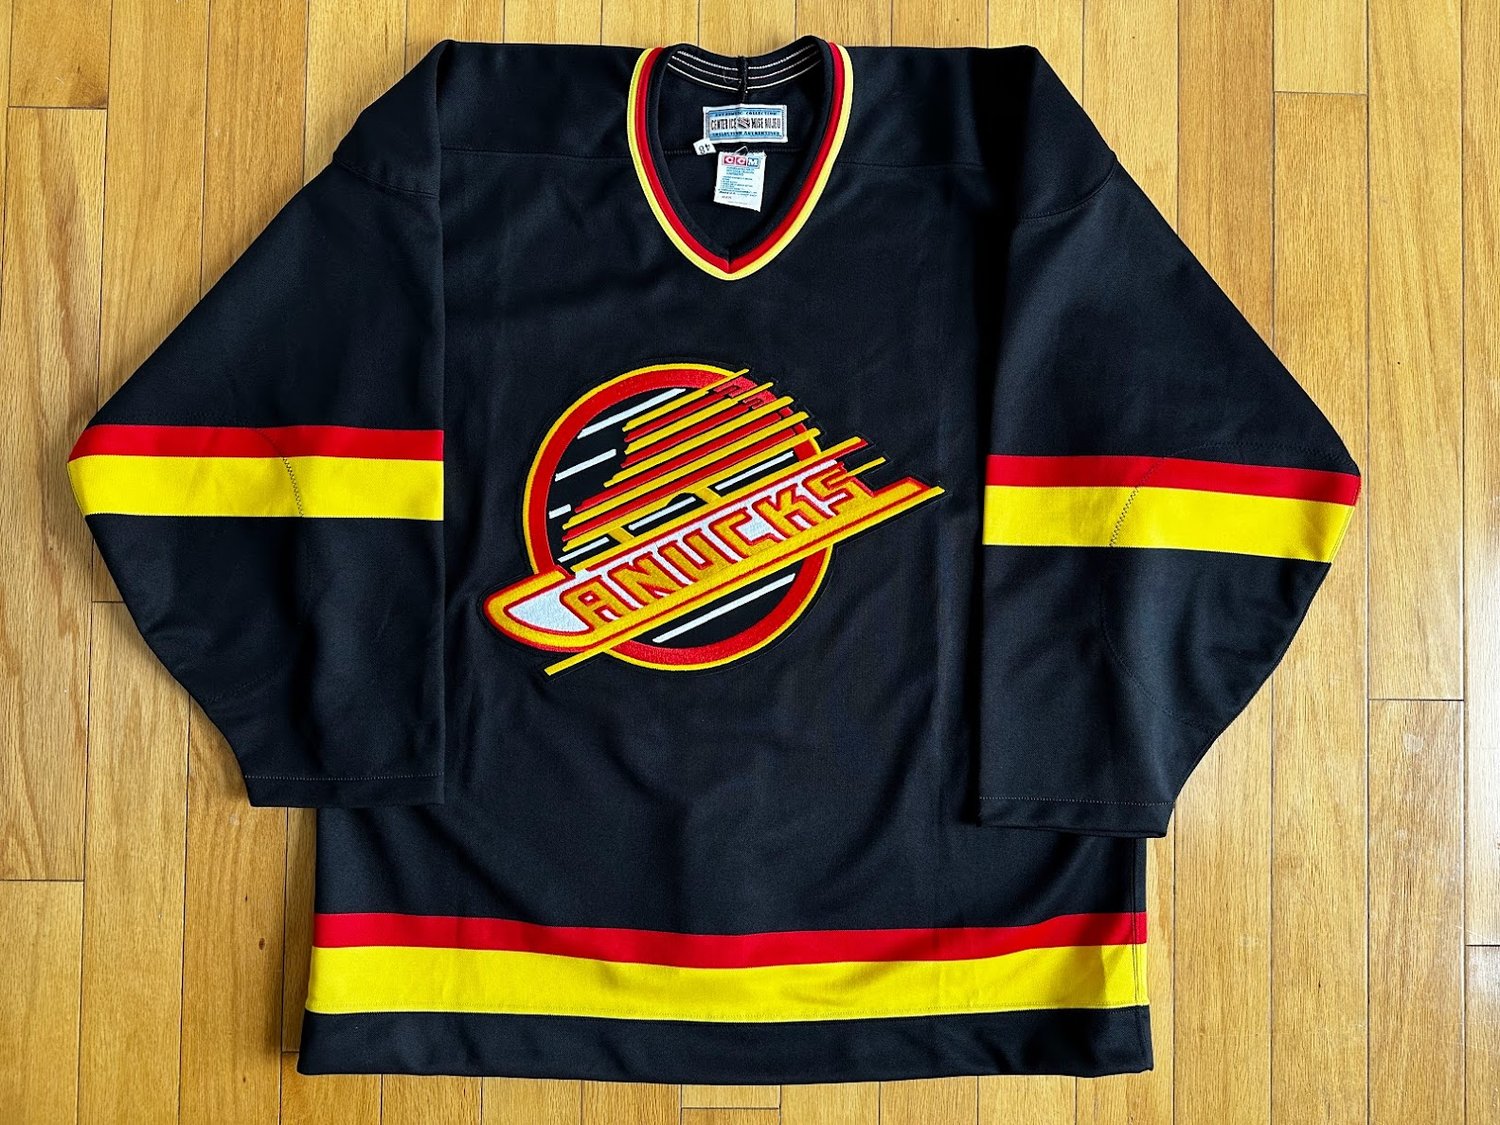 Vintage Blank Vancouver Canucks CCM Hockey Jersey Made in 